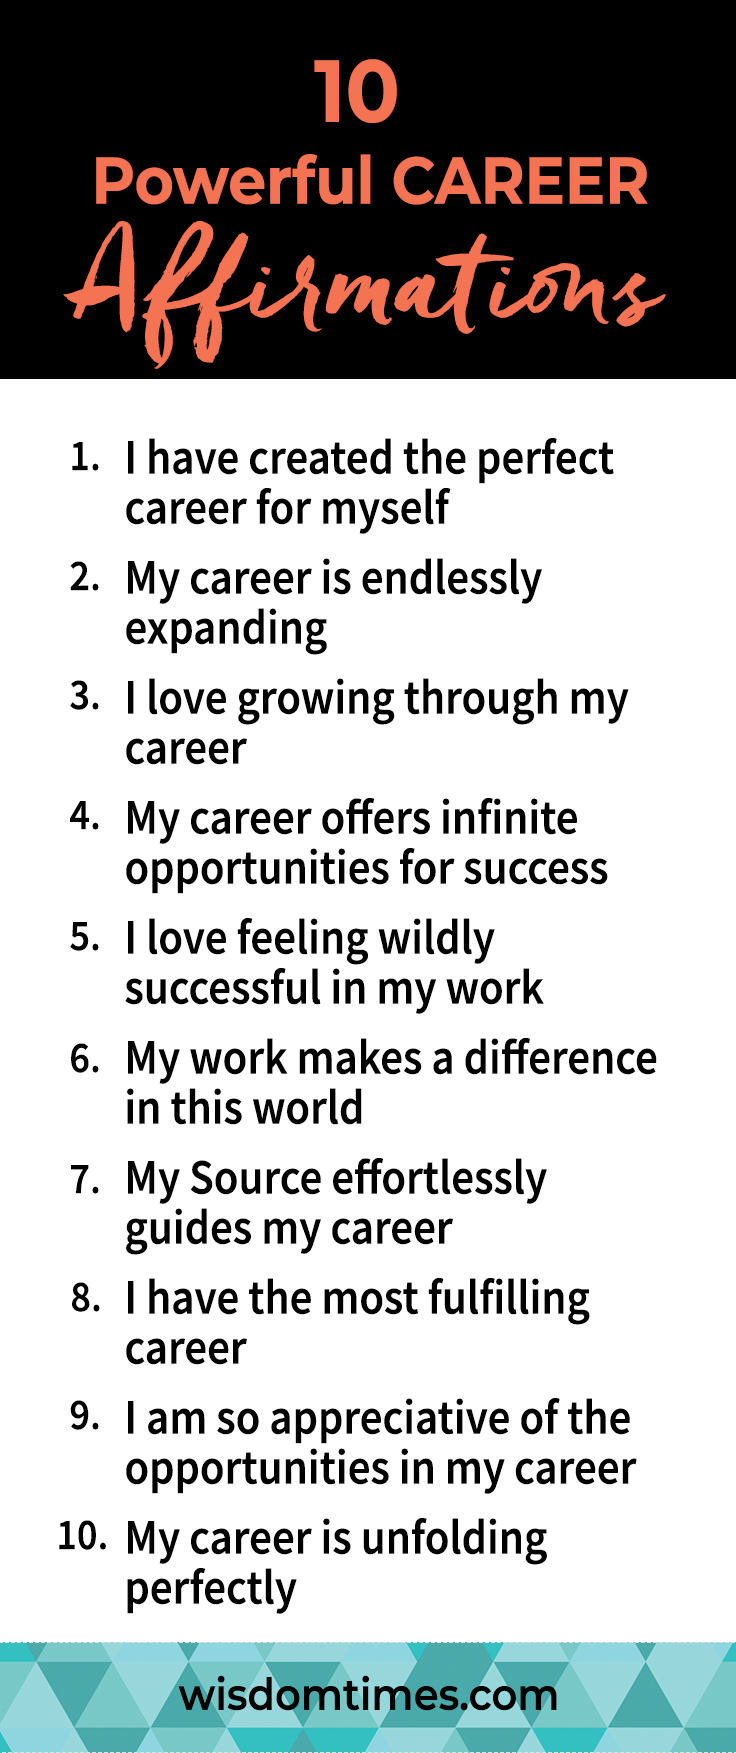 10 Powerful CAREER Affirmations